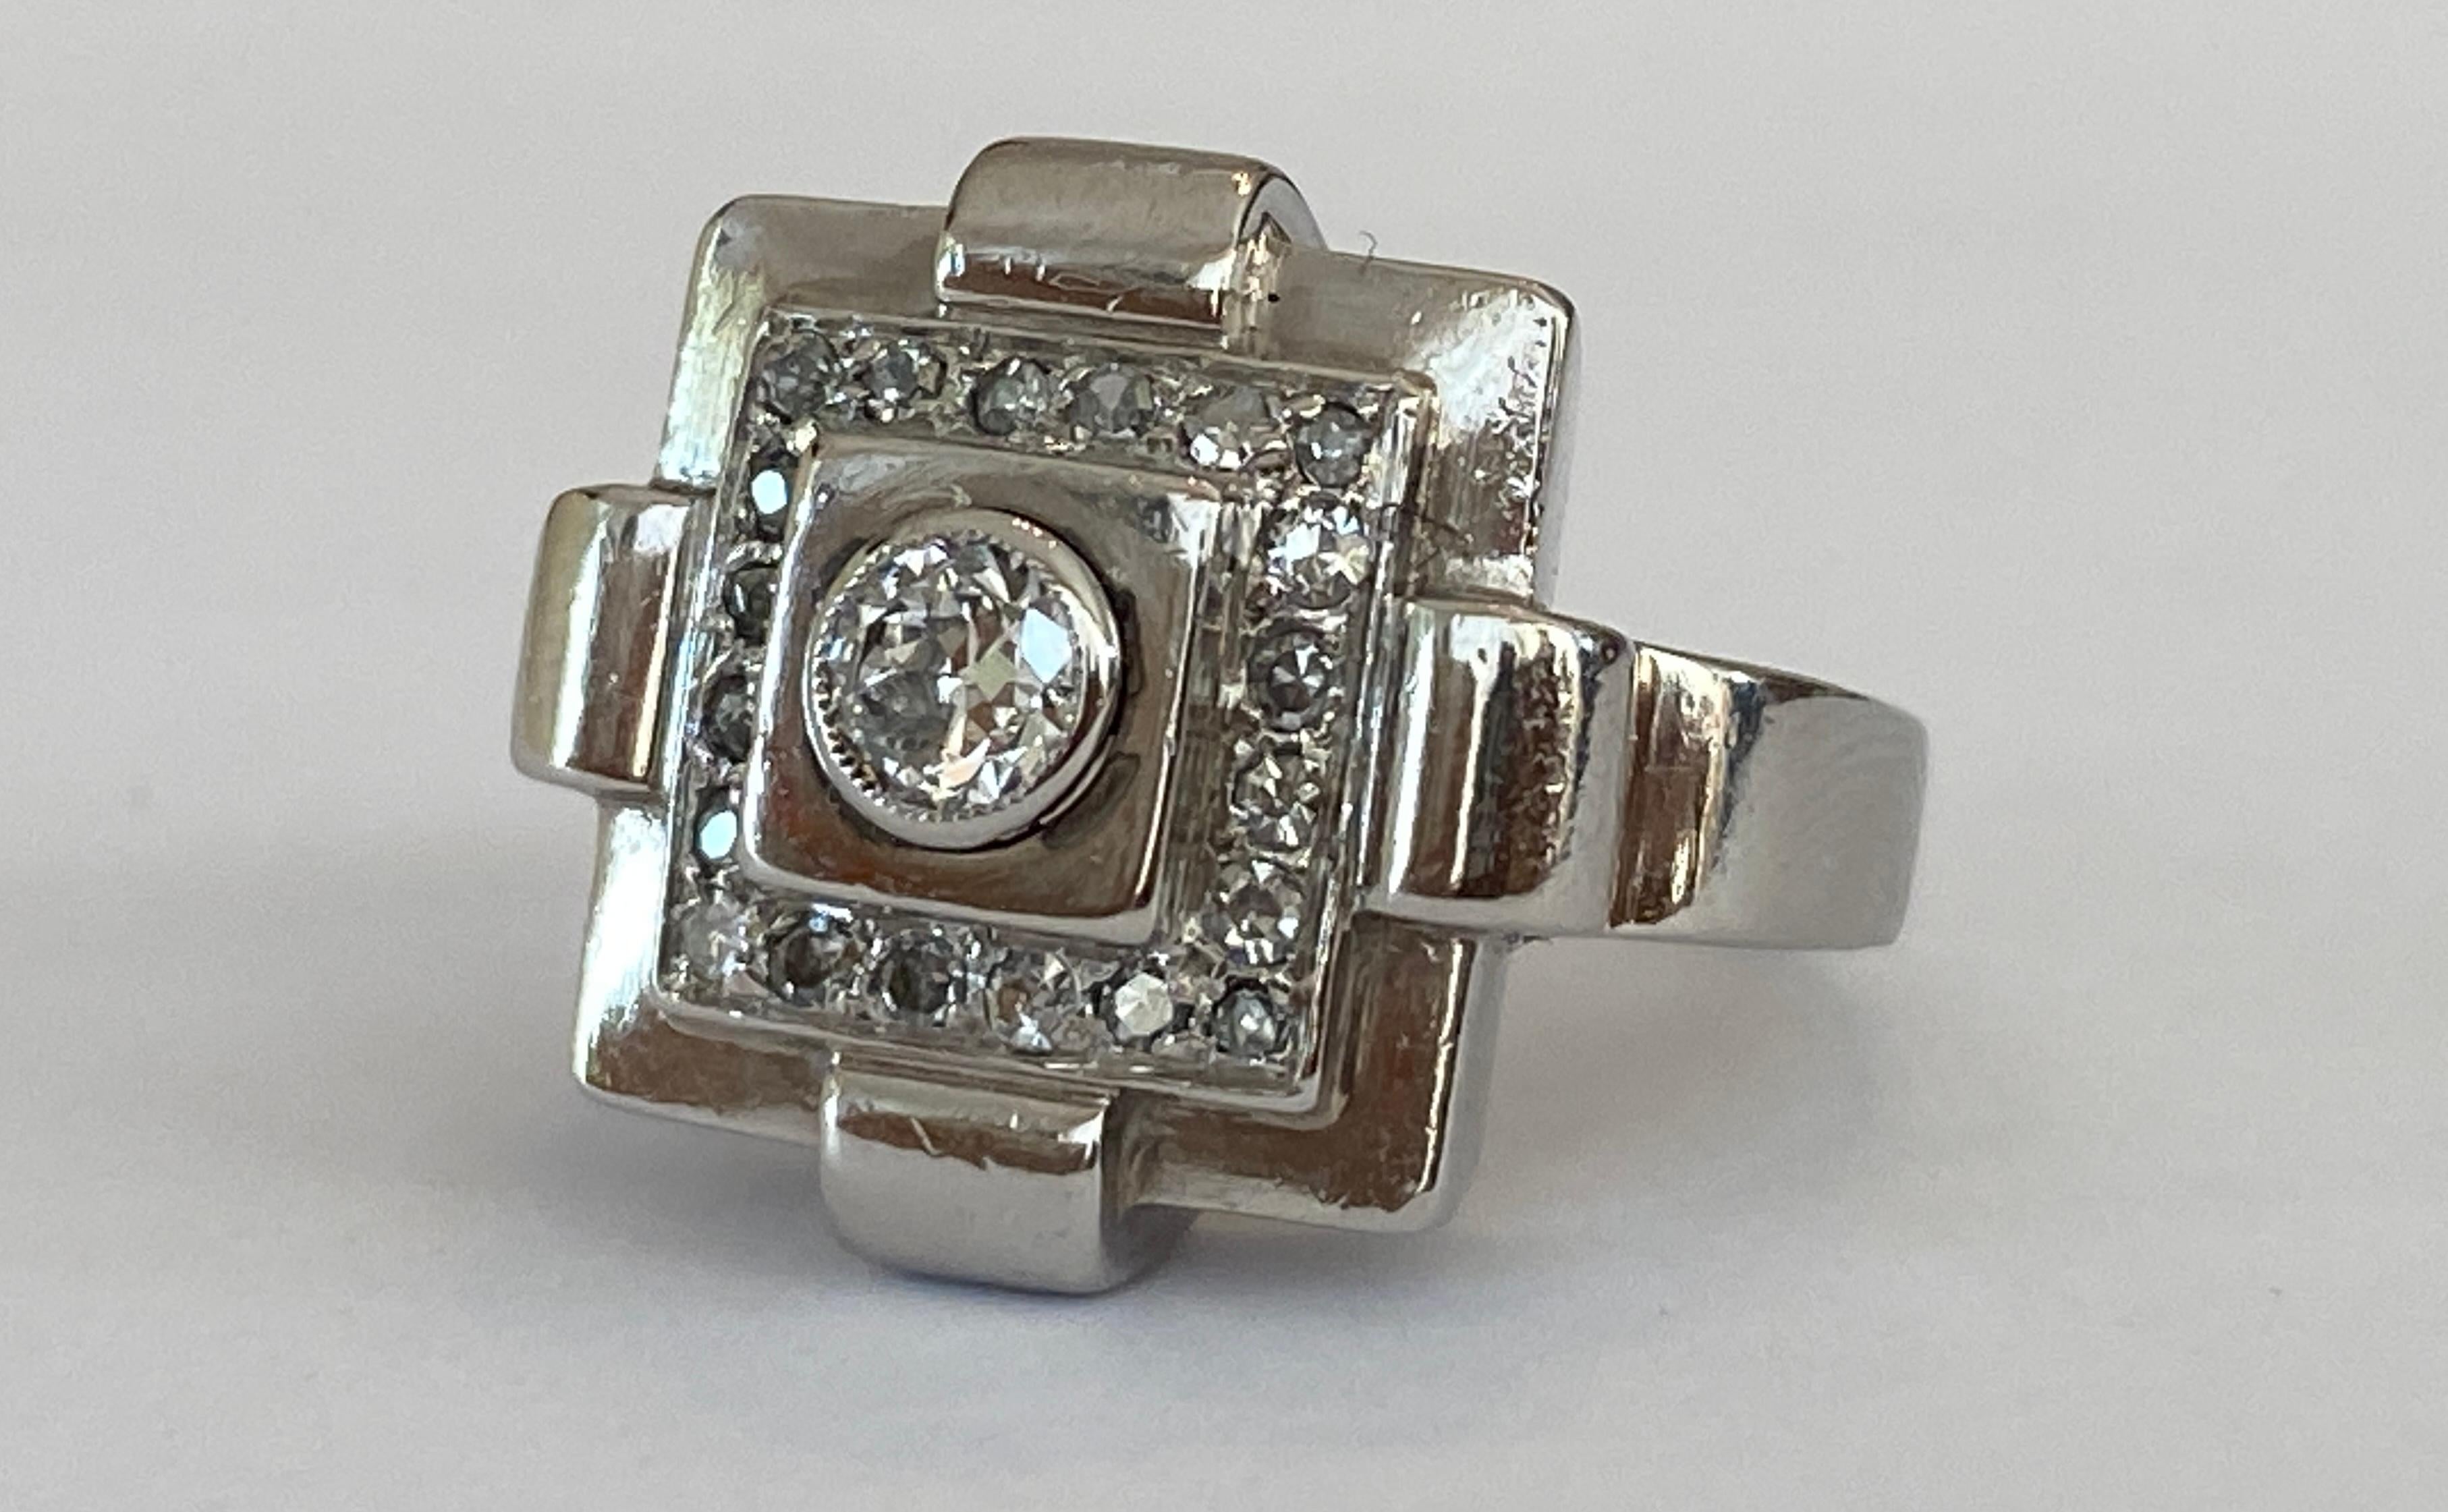 Offered original Art Deco ring in 18 kt white gold  with a typical four-lobed  ornamental piece set with a Bolshevik cut diamond approx 0.20 ct H/SI
and decorated  with 20 octagon cut diamonds approx 0.20 ct H/SI/P1.
The ring  has some  signs of